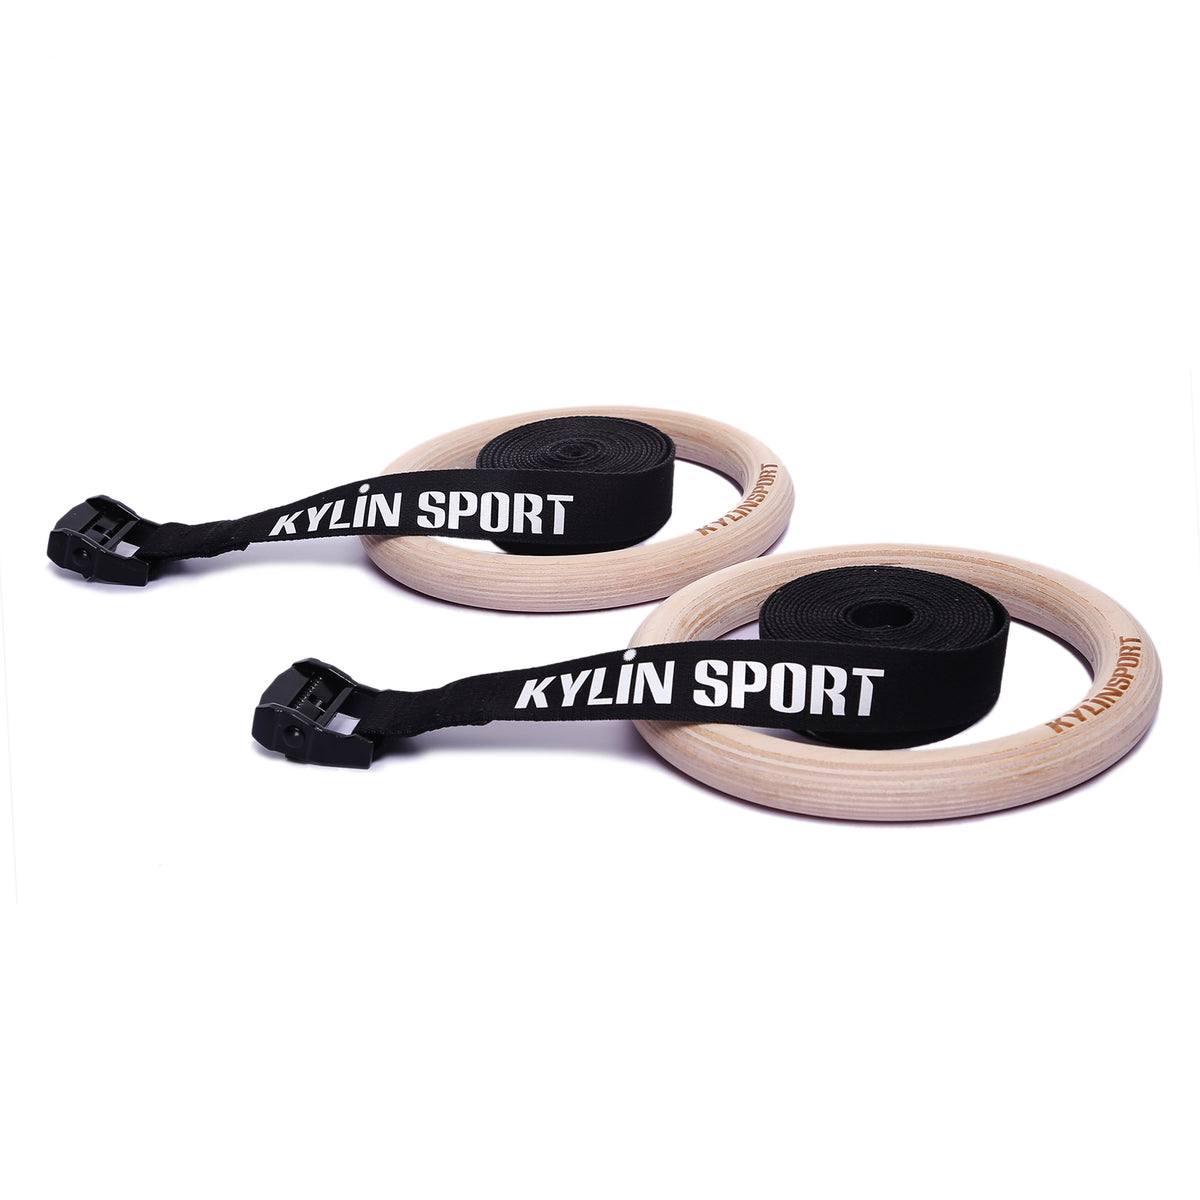 KYLIN SPORT Gymnastic Rings with Adjustable Straps Heavy Duty Exercise Gym Rings for Pull Ups and Dips,Cross-Training Workout,Strength Training,Fitness